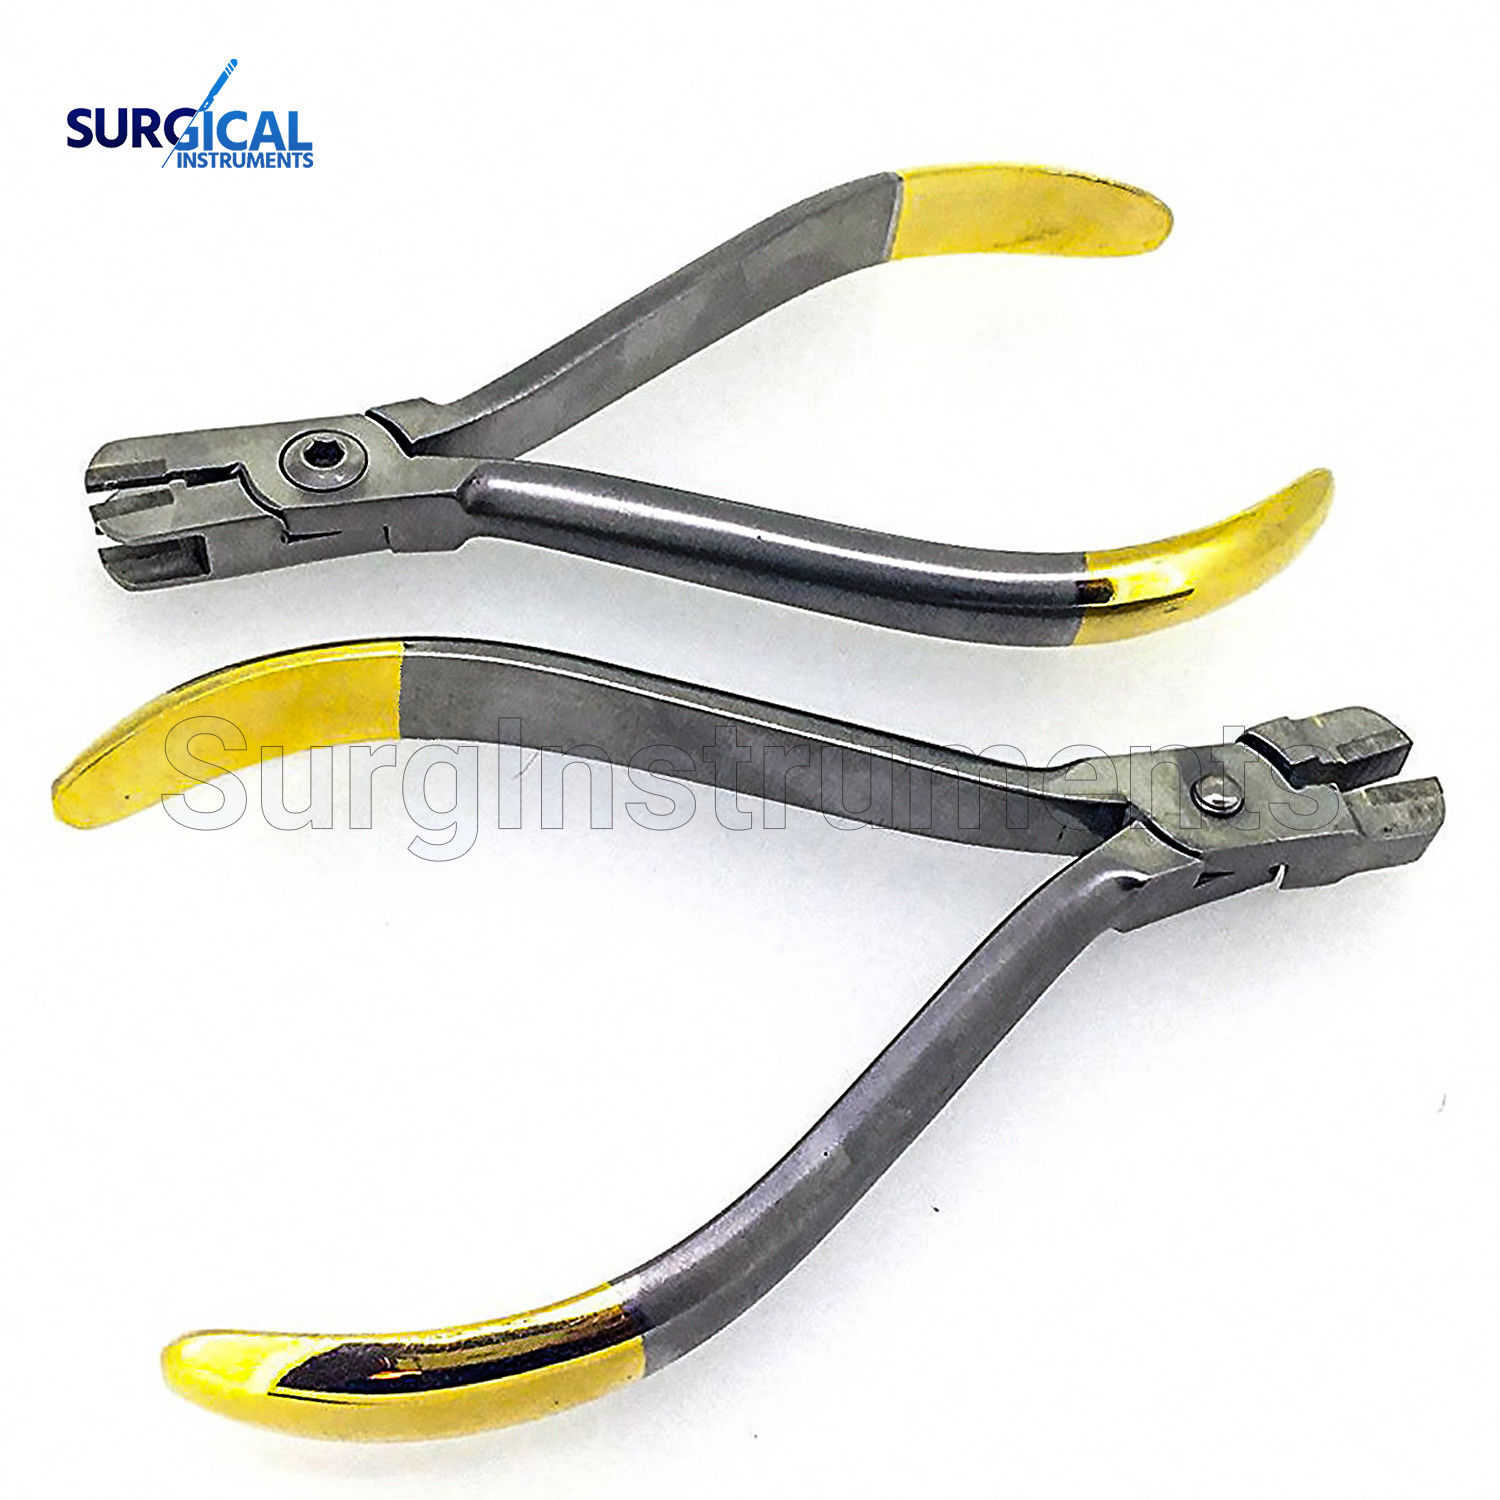 Male & Female Torquing Pliers Orthodontic Instruments - Ideal for Dentist